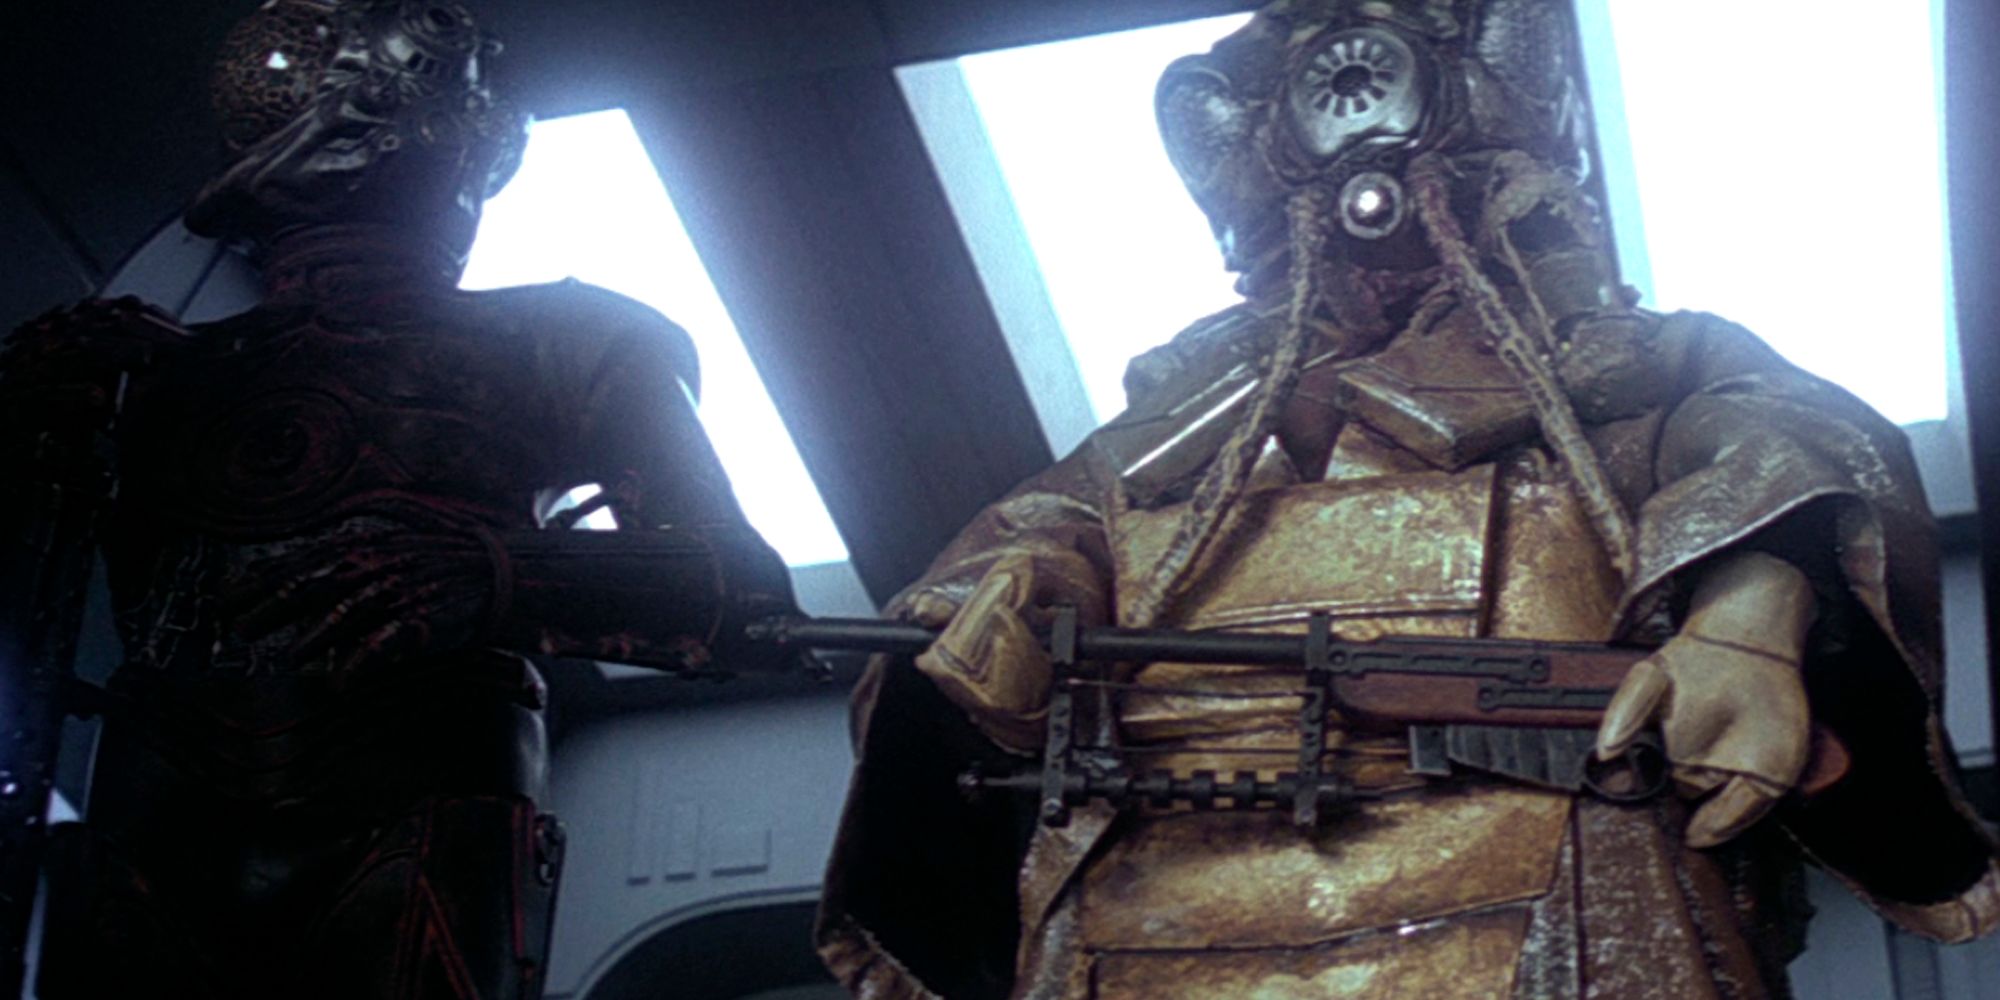 Every Bounty Hunter In Empire Strikes Back (& What Happened To Them)